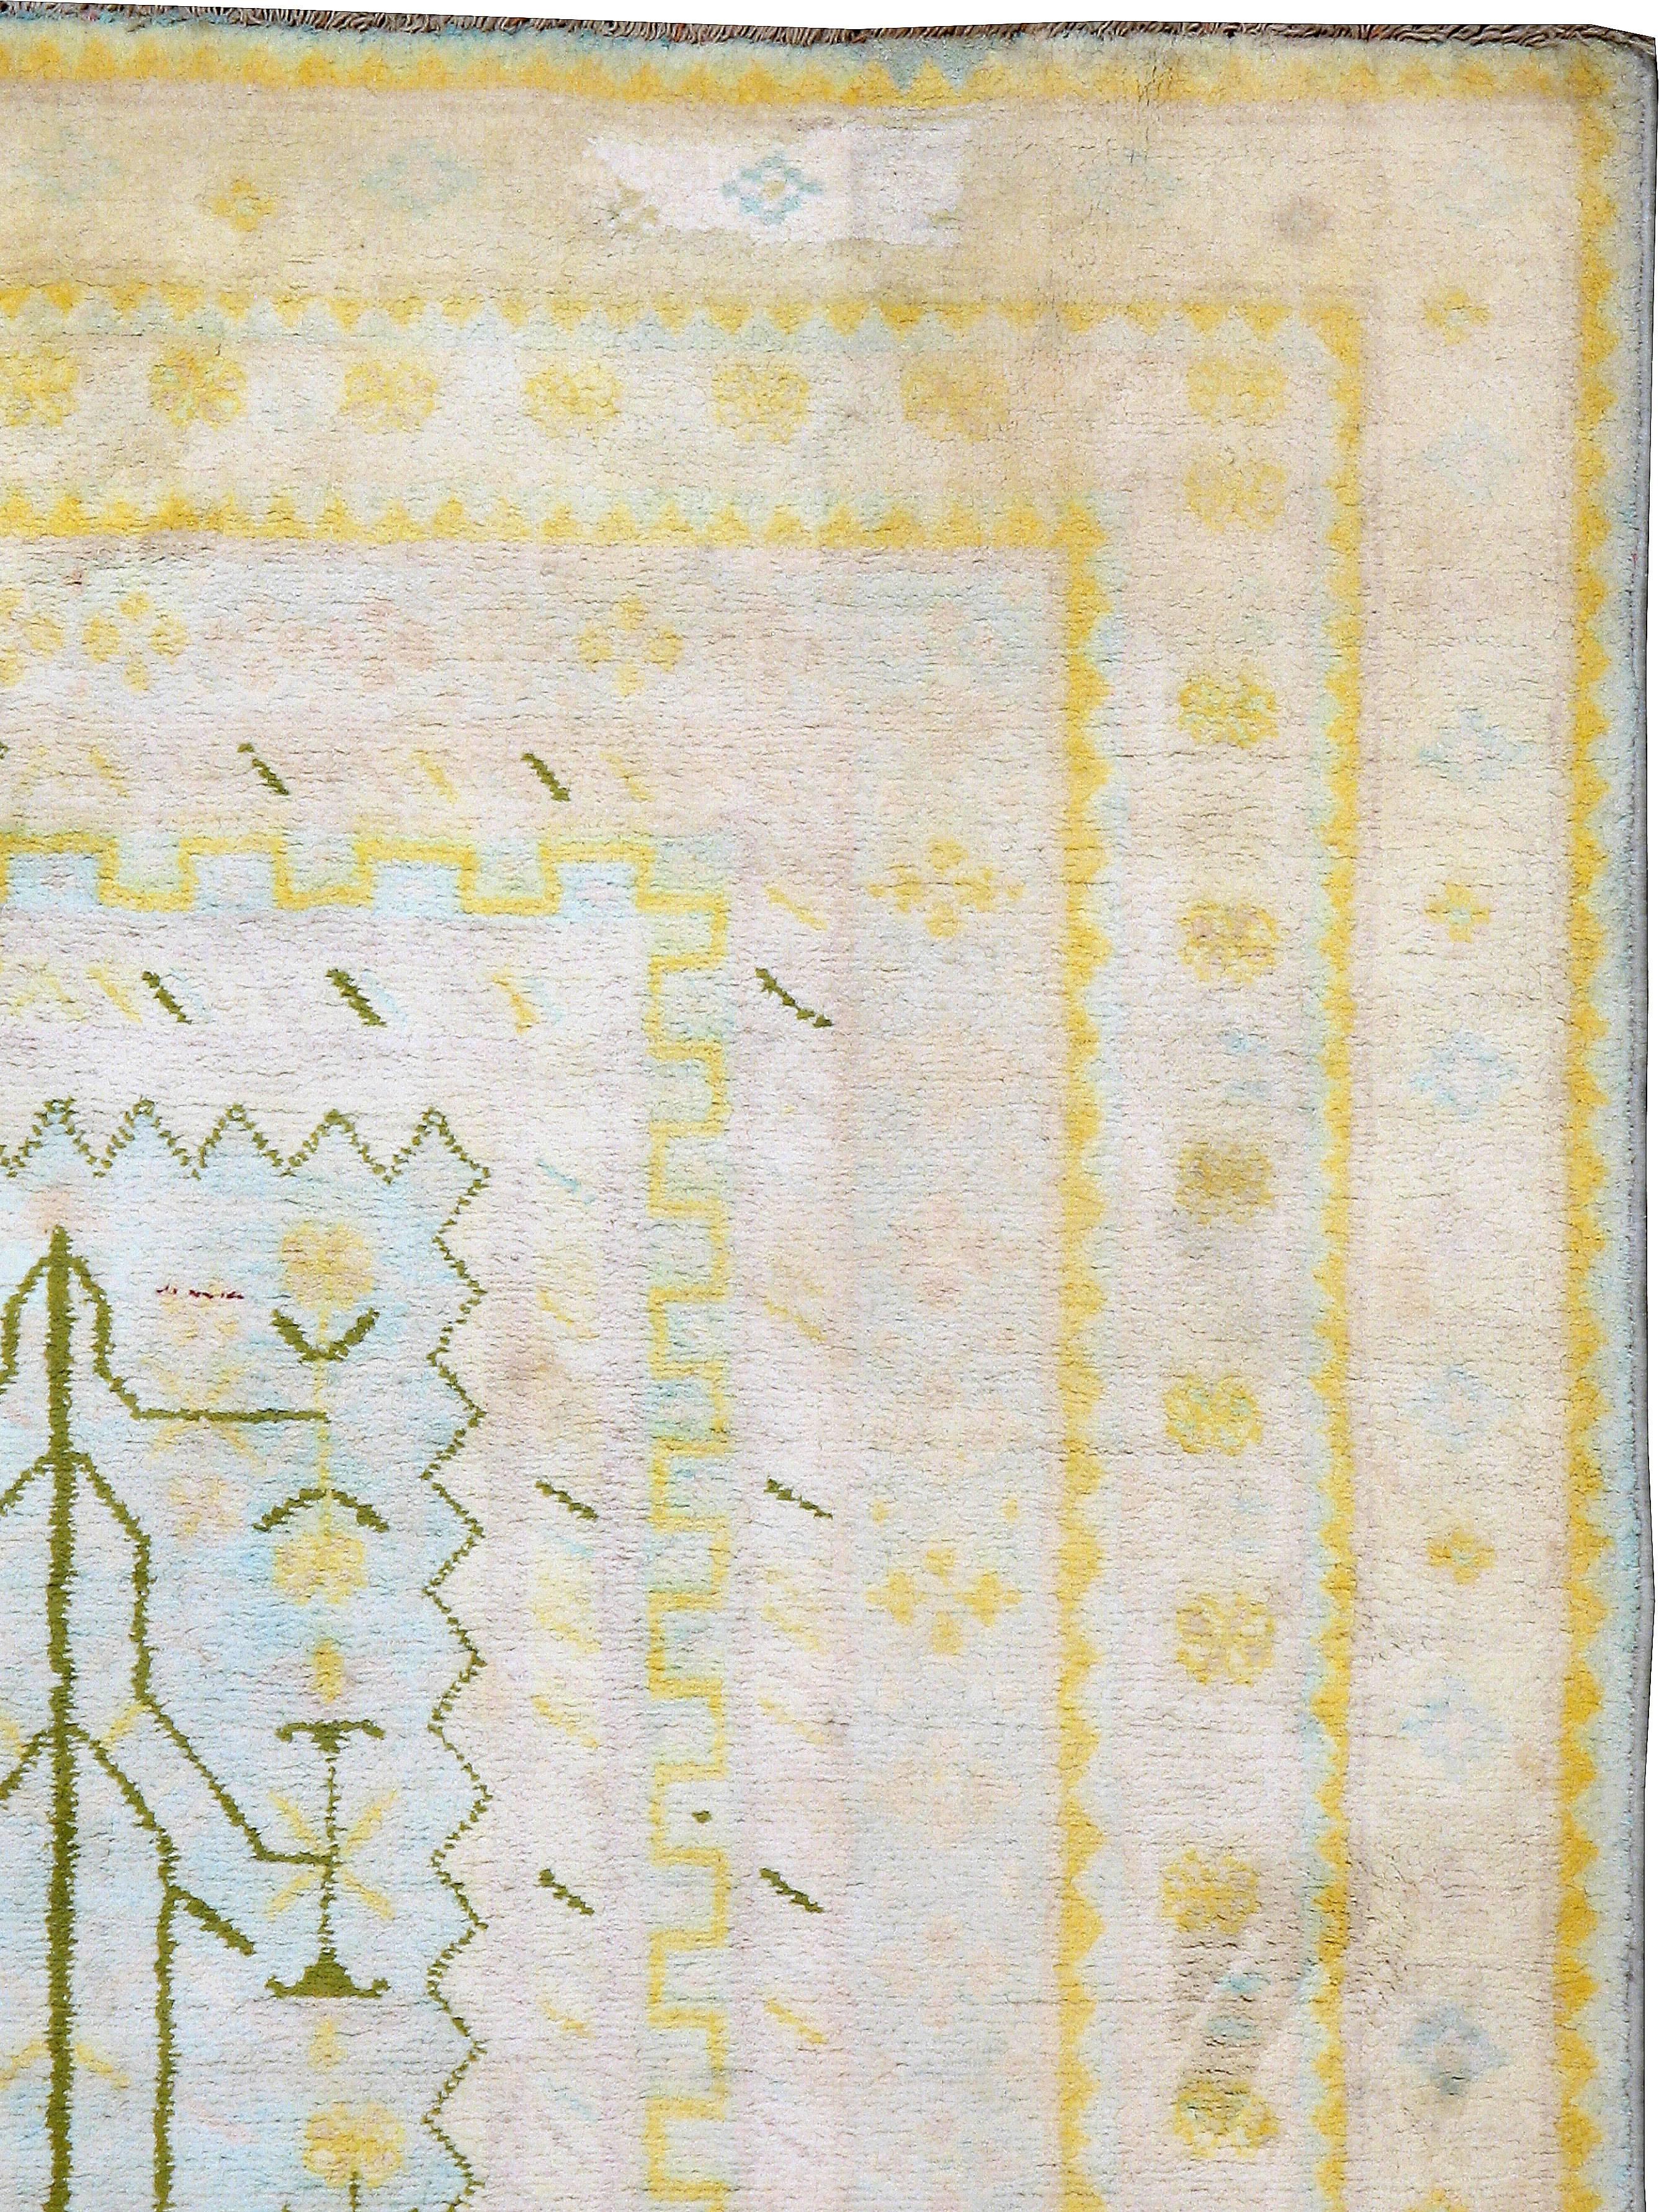 A vintage Indian Cotton Agra carpet, from the second quarter of the 20th century, featuring a soft texture with an ivory field with hints of sap green and sky blue.